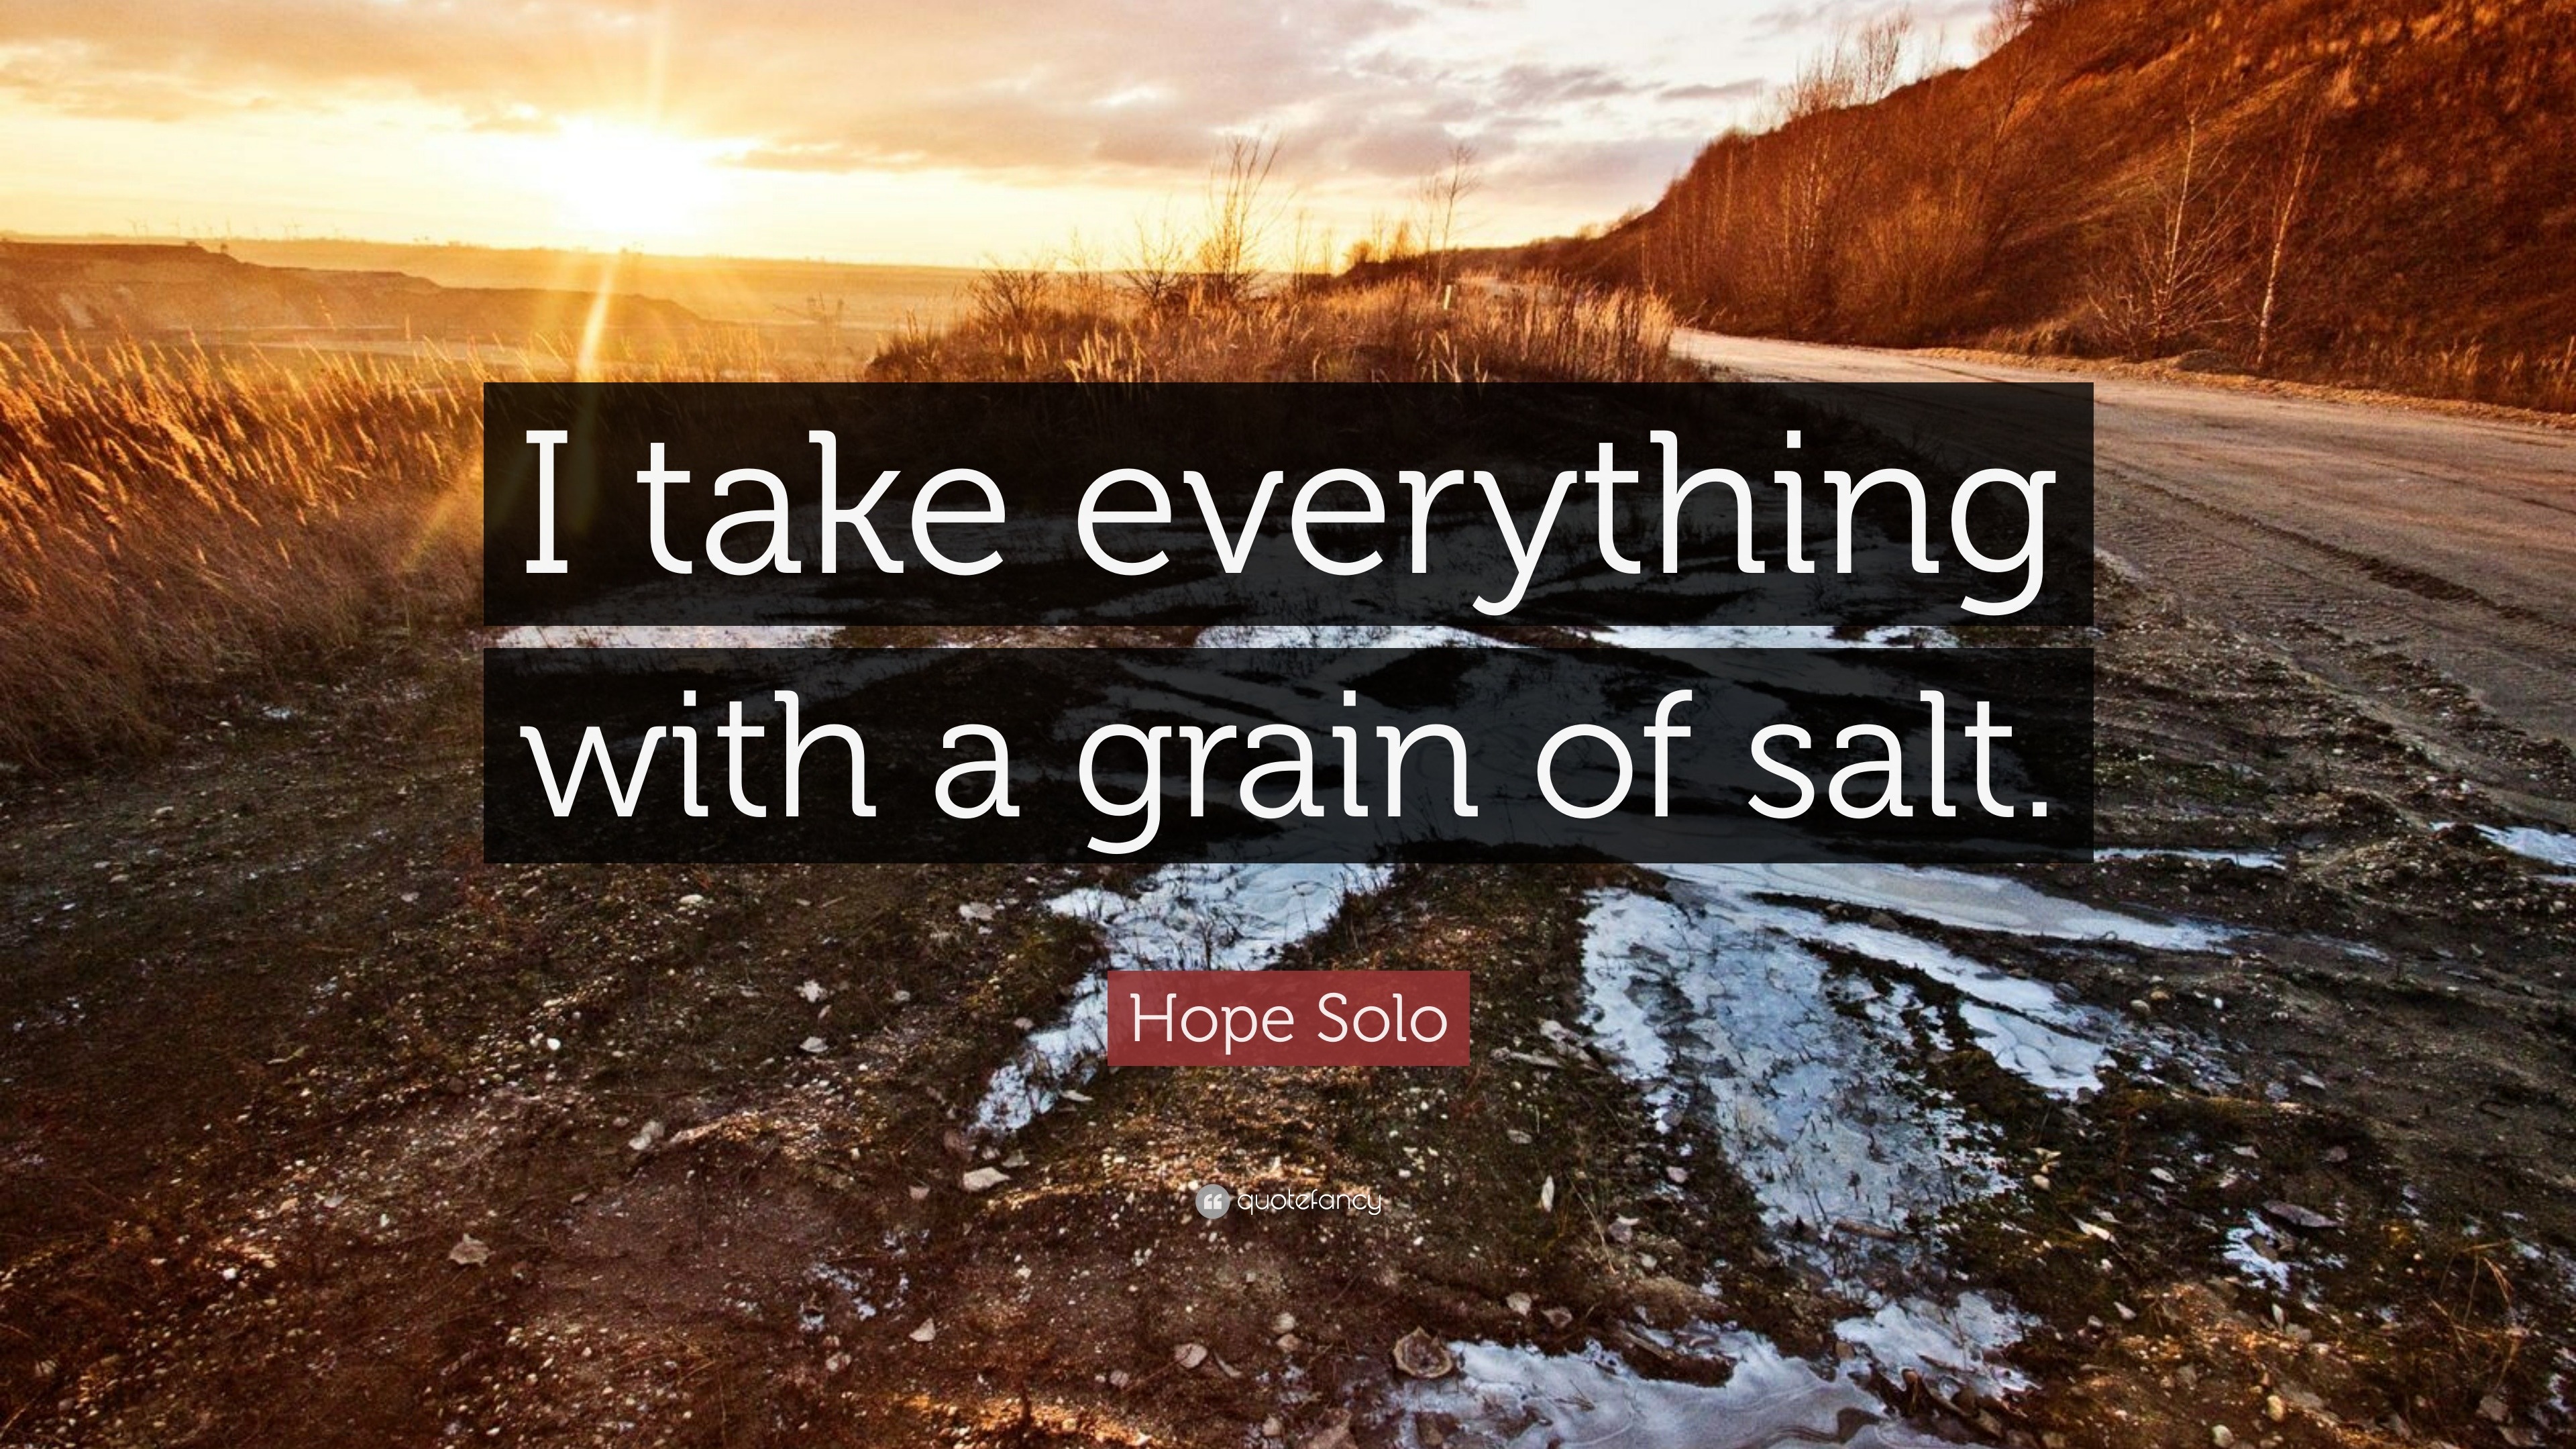 Hope Solo Quote: “I take everything with a grain of salt.”